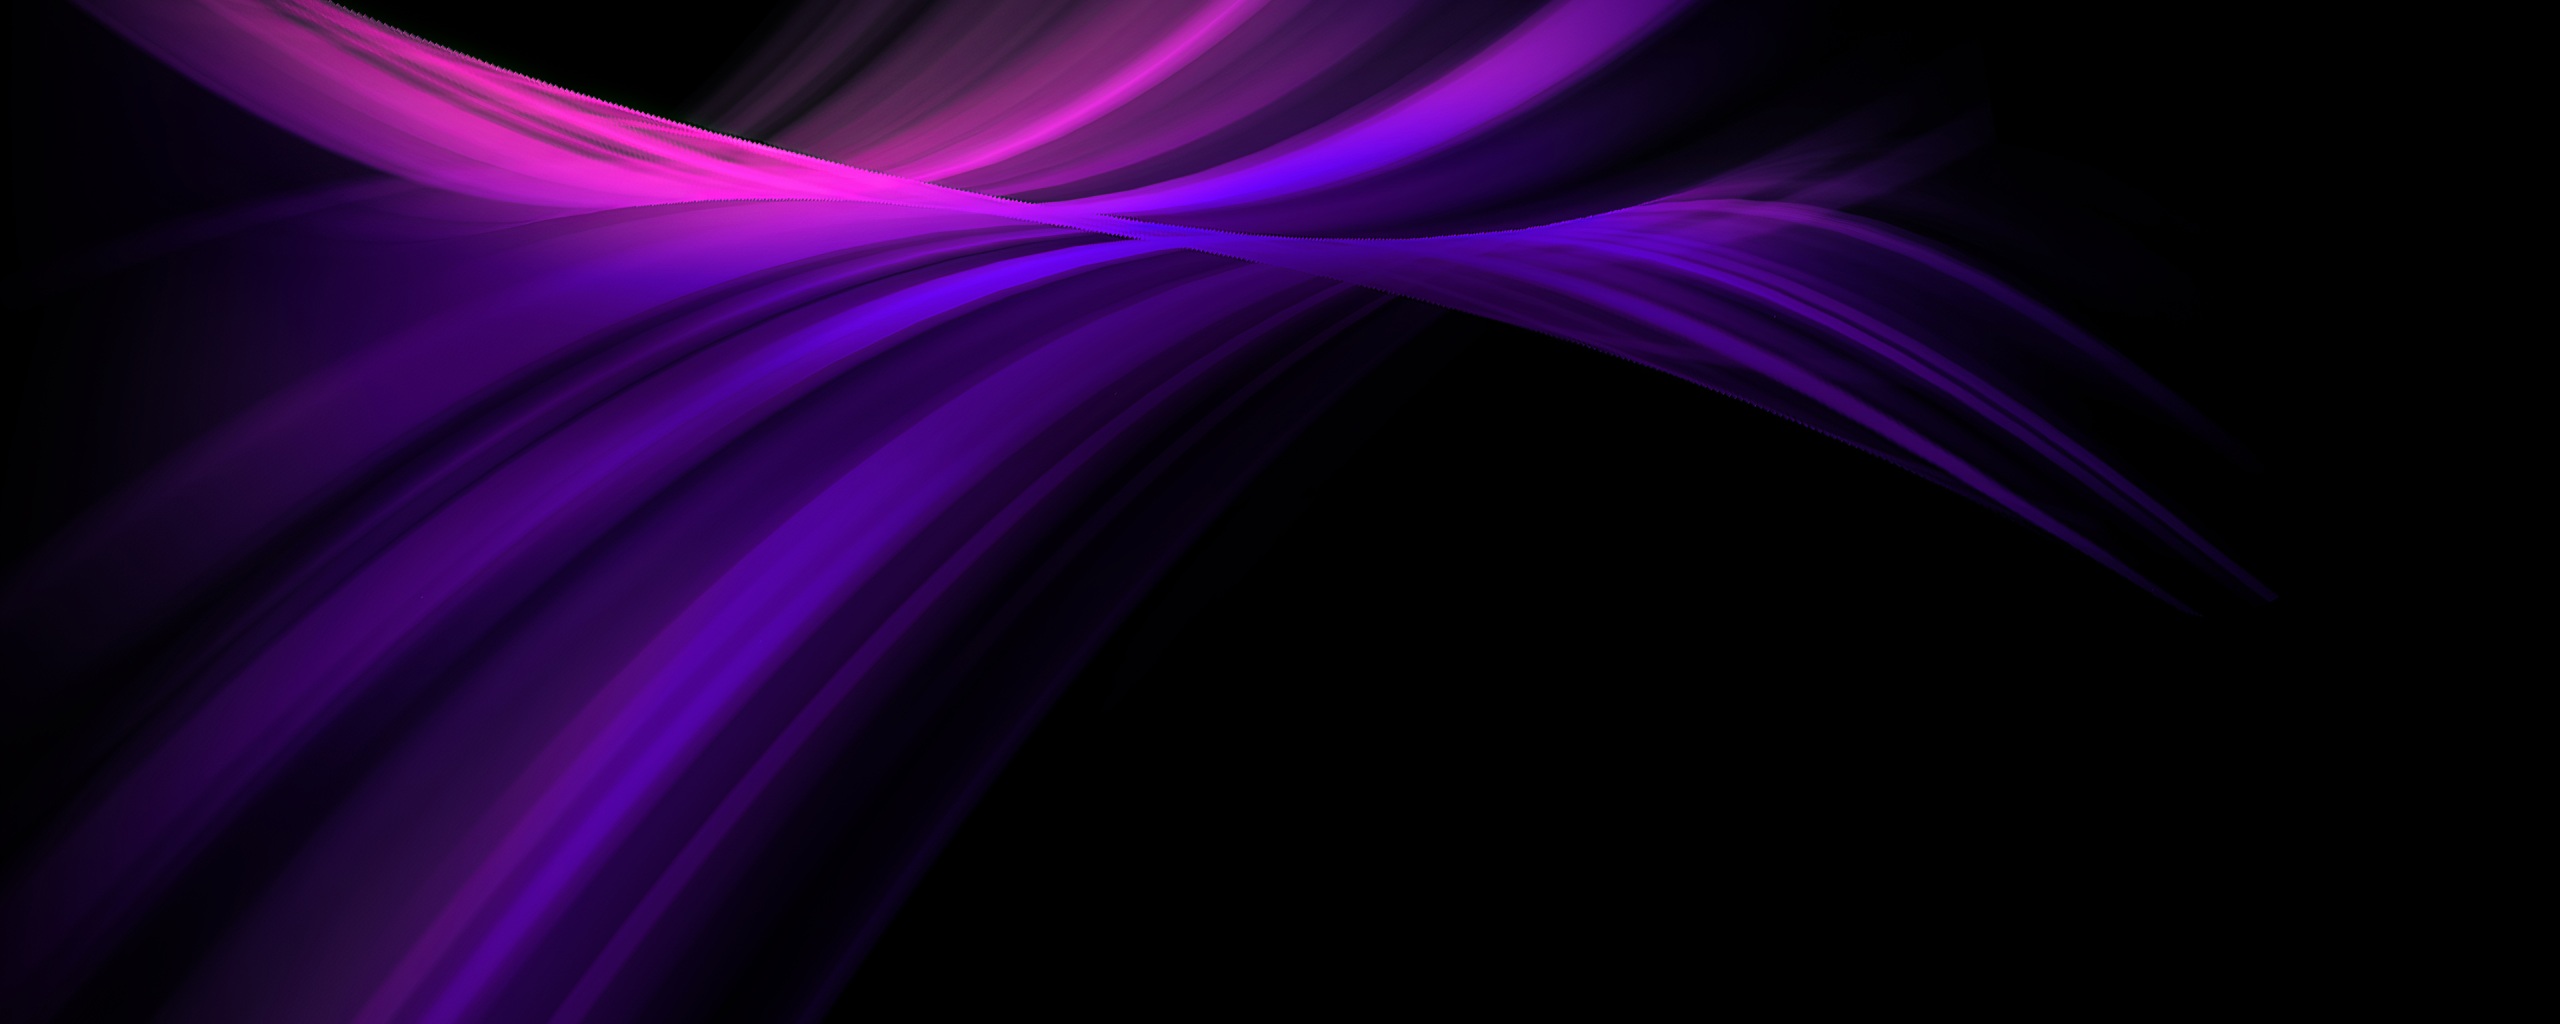 Smooth Purple Abstract - 4k Wallpapers - 40.000+ ipad wallpapers 4k ...